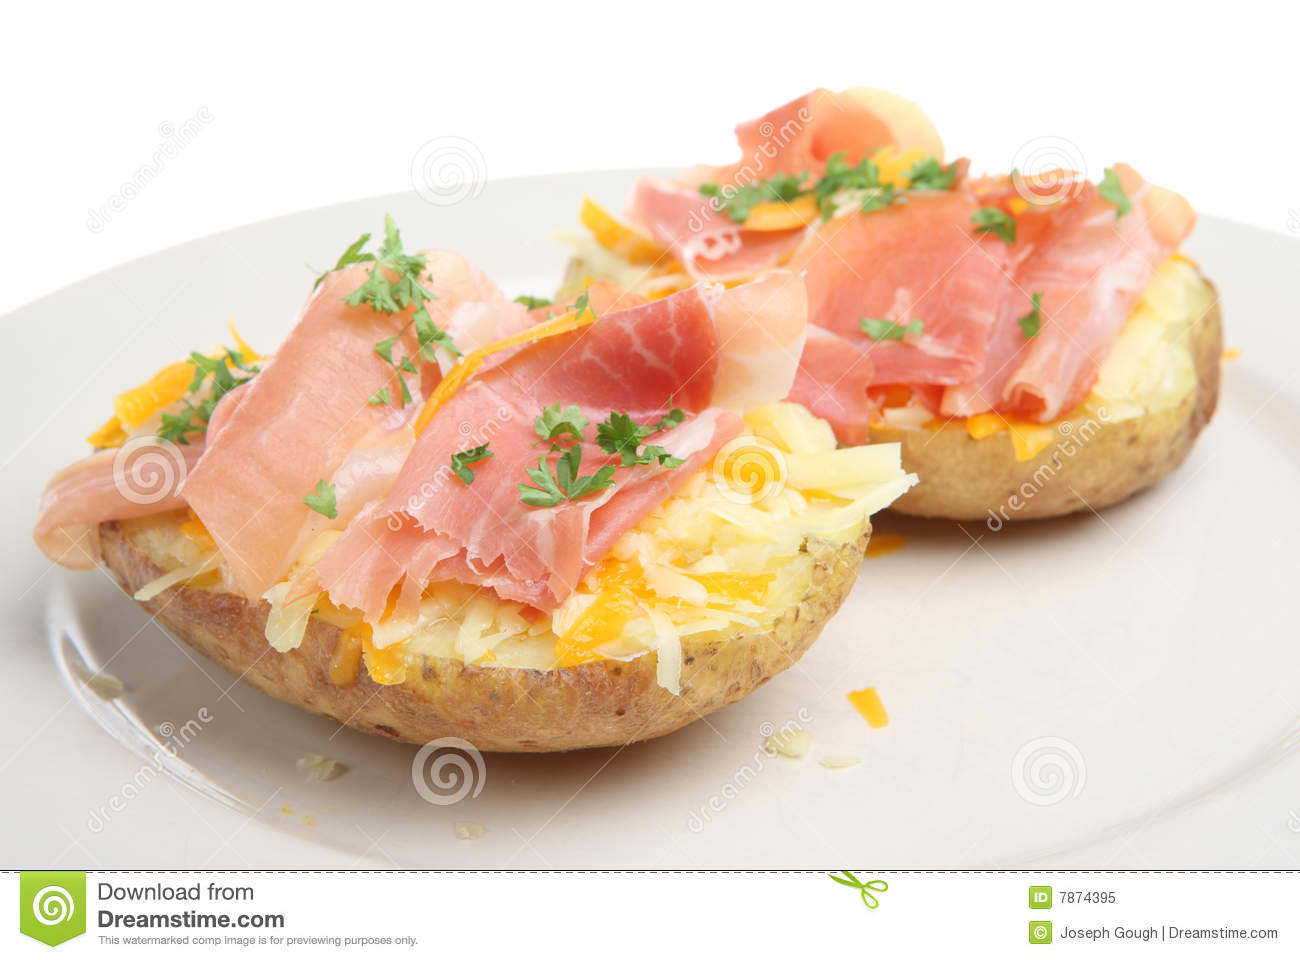 Jacket Potato With Ham And Cheese Royalty Free Stock Photo   Image